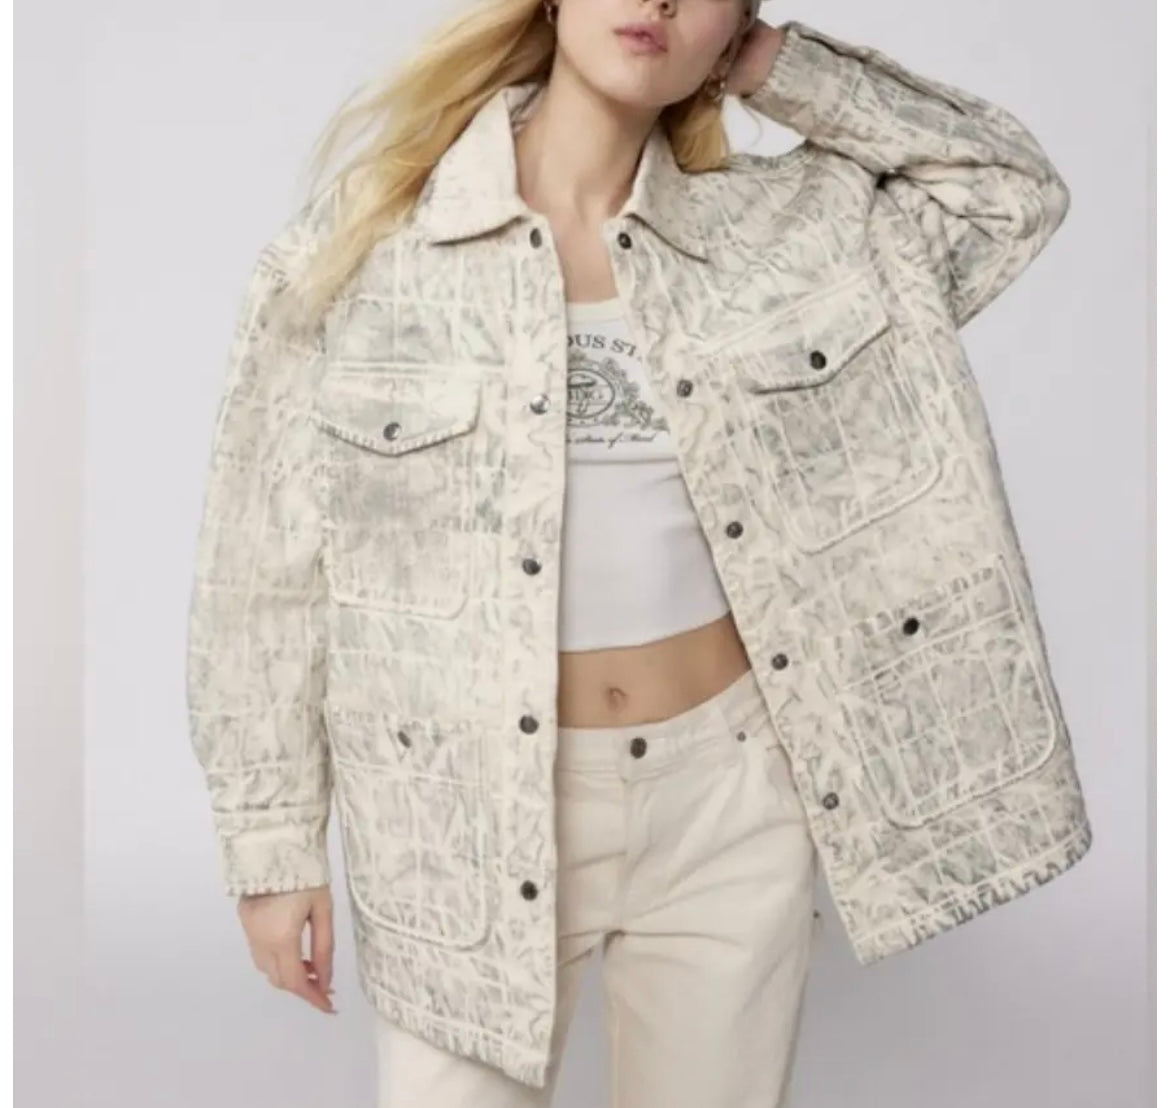 URBAN OUTFITTERS GEMMA JACKET